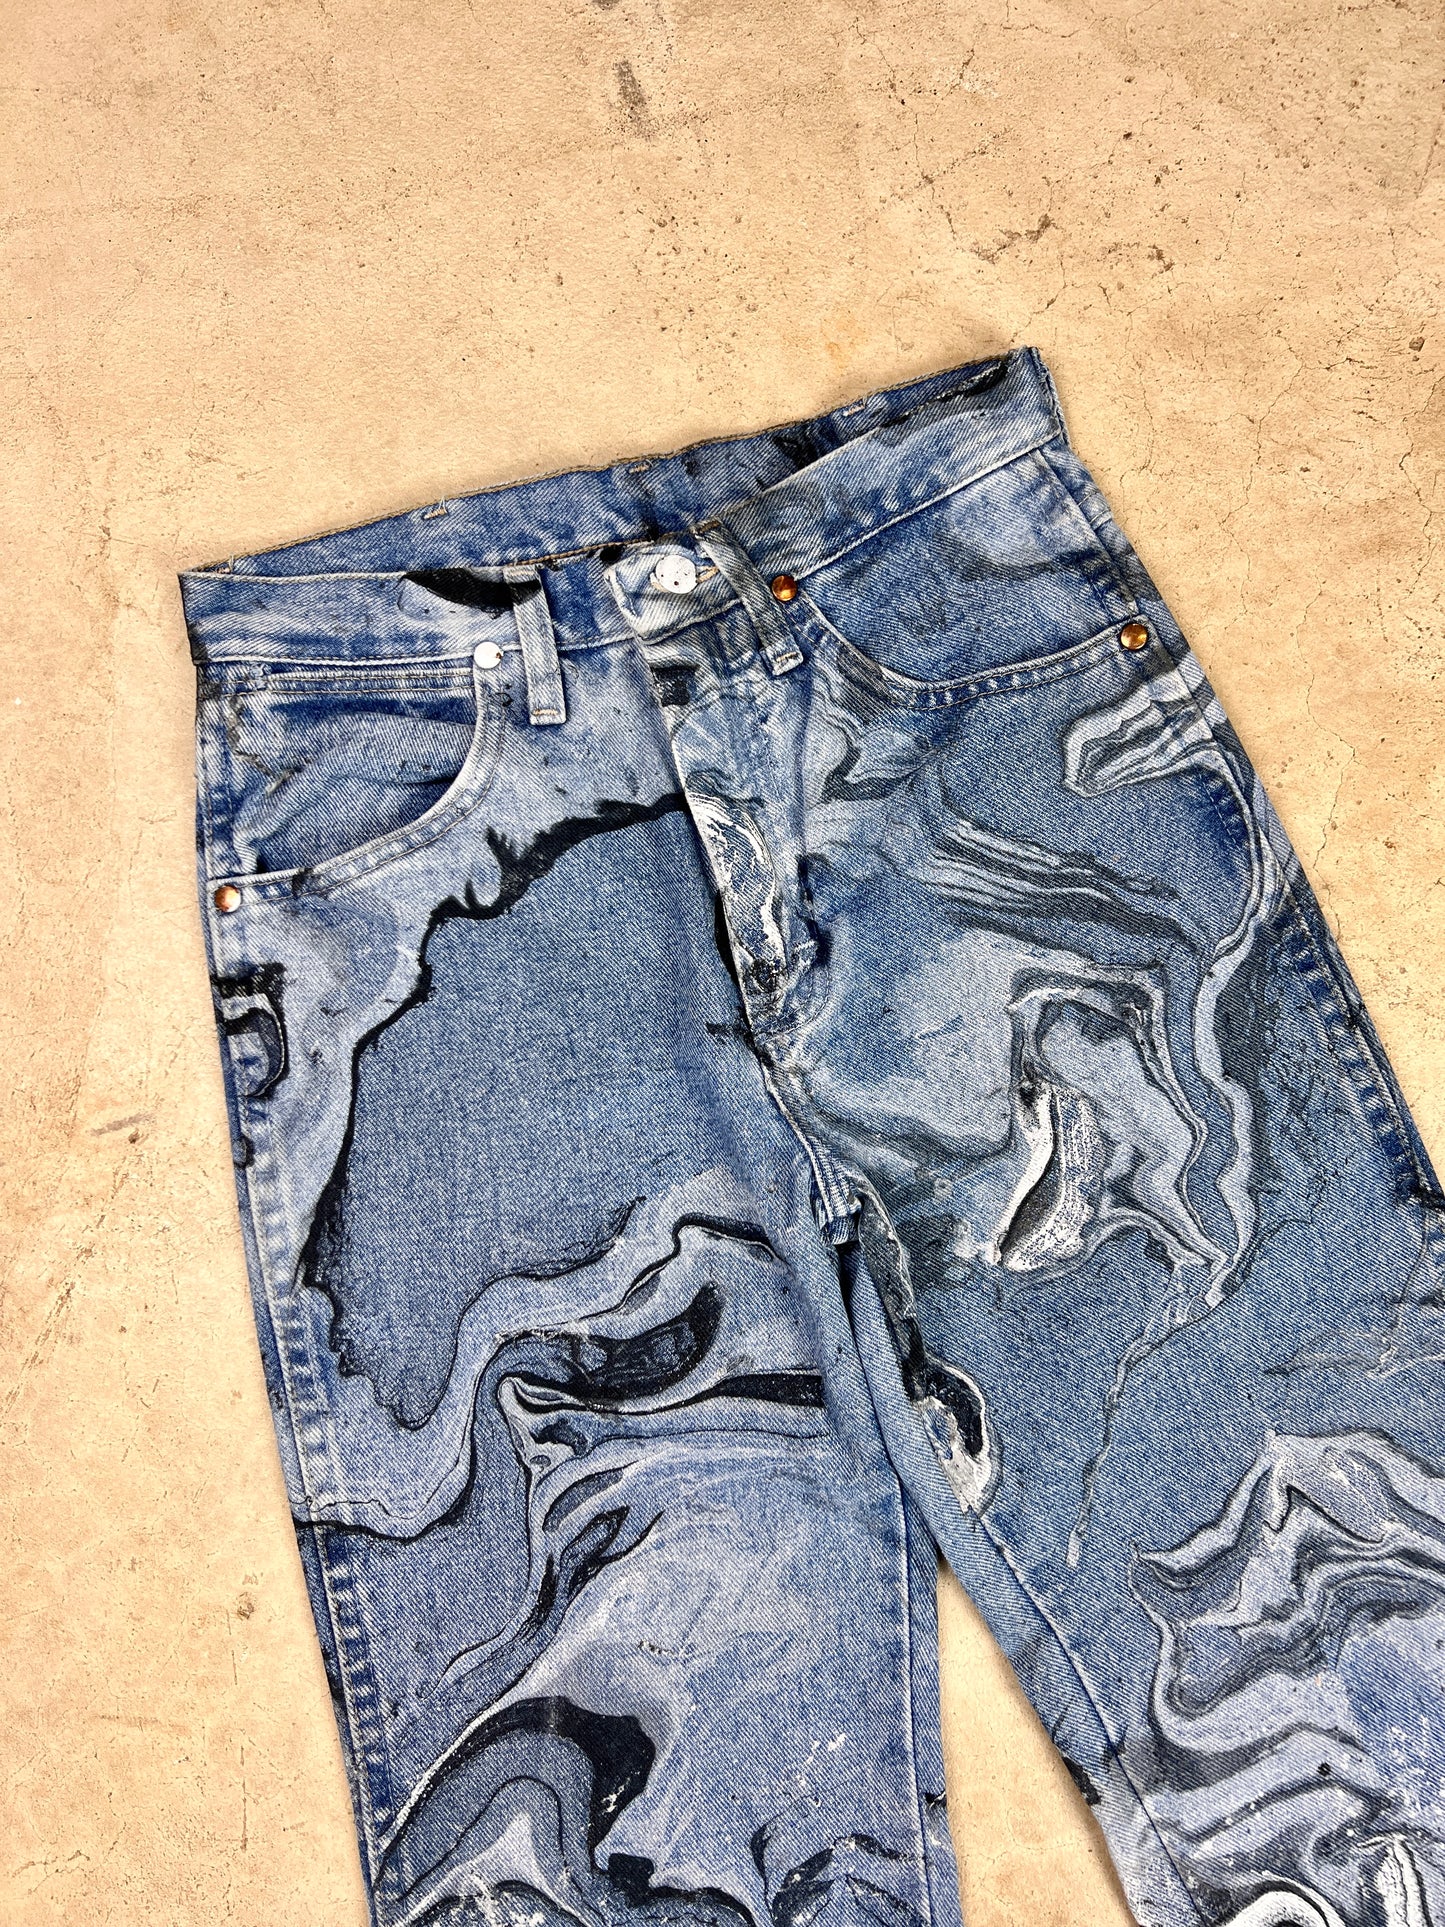 The Marbled Straight Leg Jeans - 27"